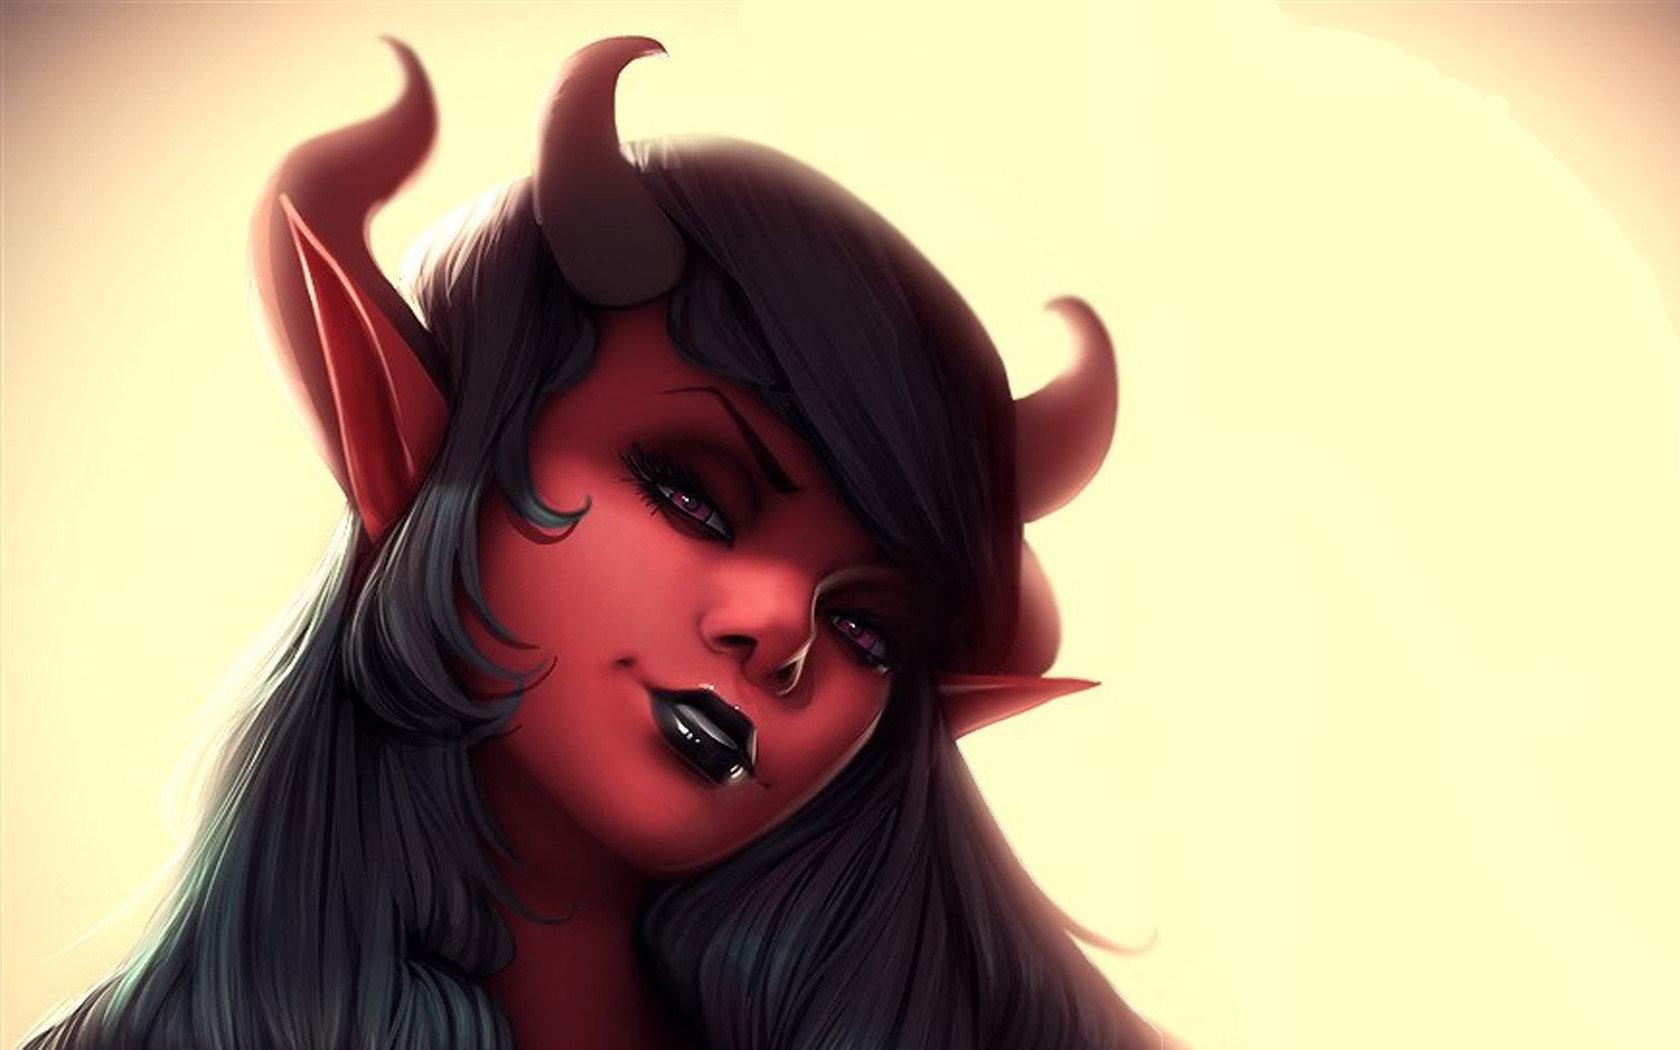 Succubus Demon girl Live Wallpaper  1920x1080  Rare Gallery HD Live  Wallpapers